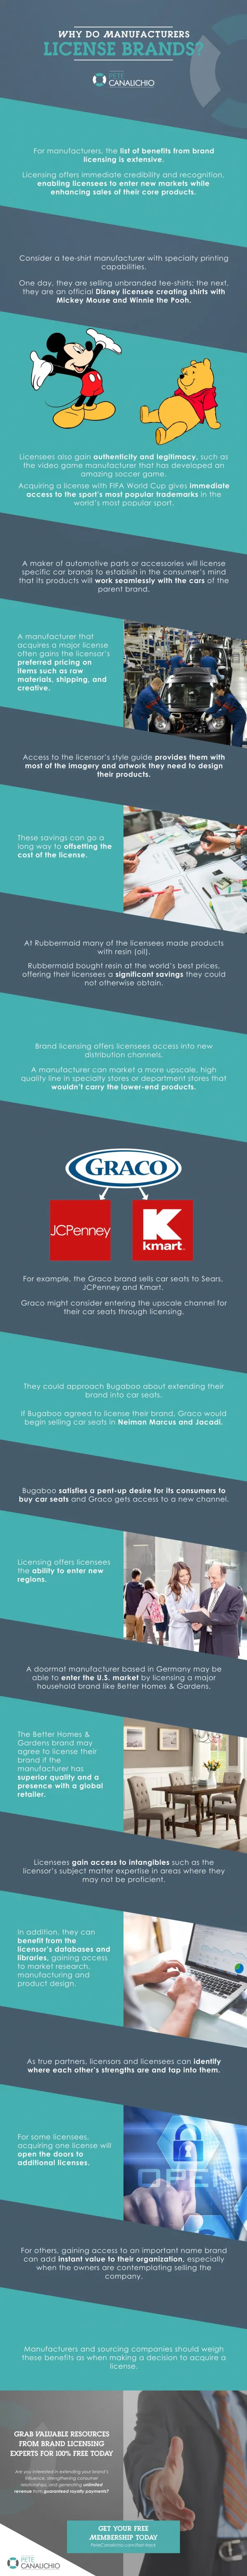 Why Do Manufacturers License Brands | Brand Strategy | Branding